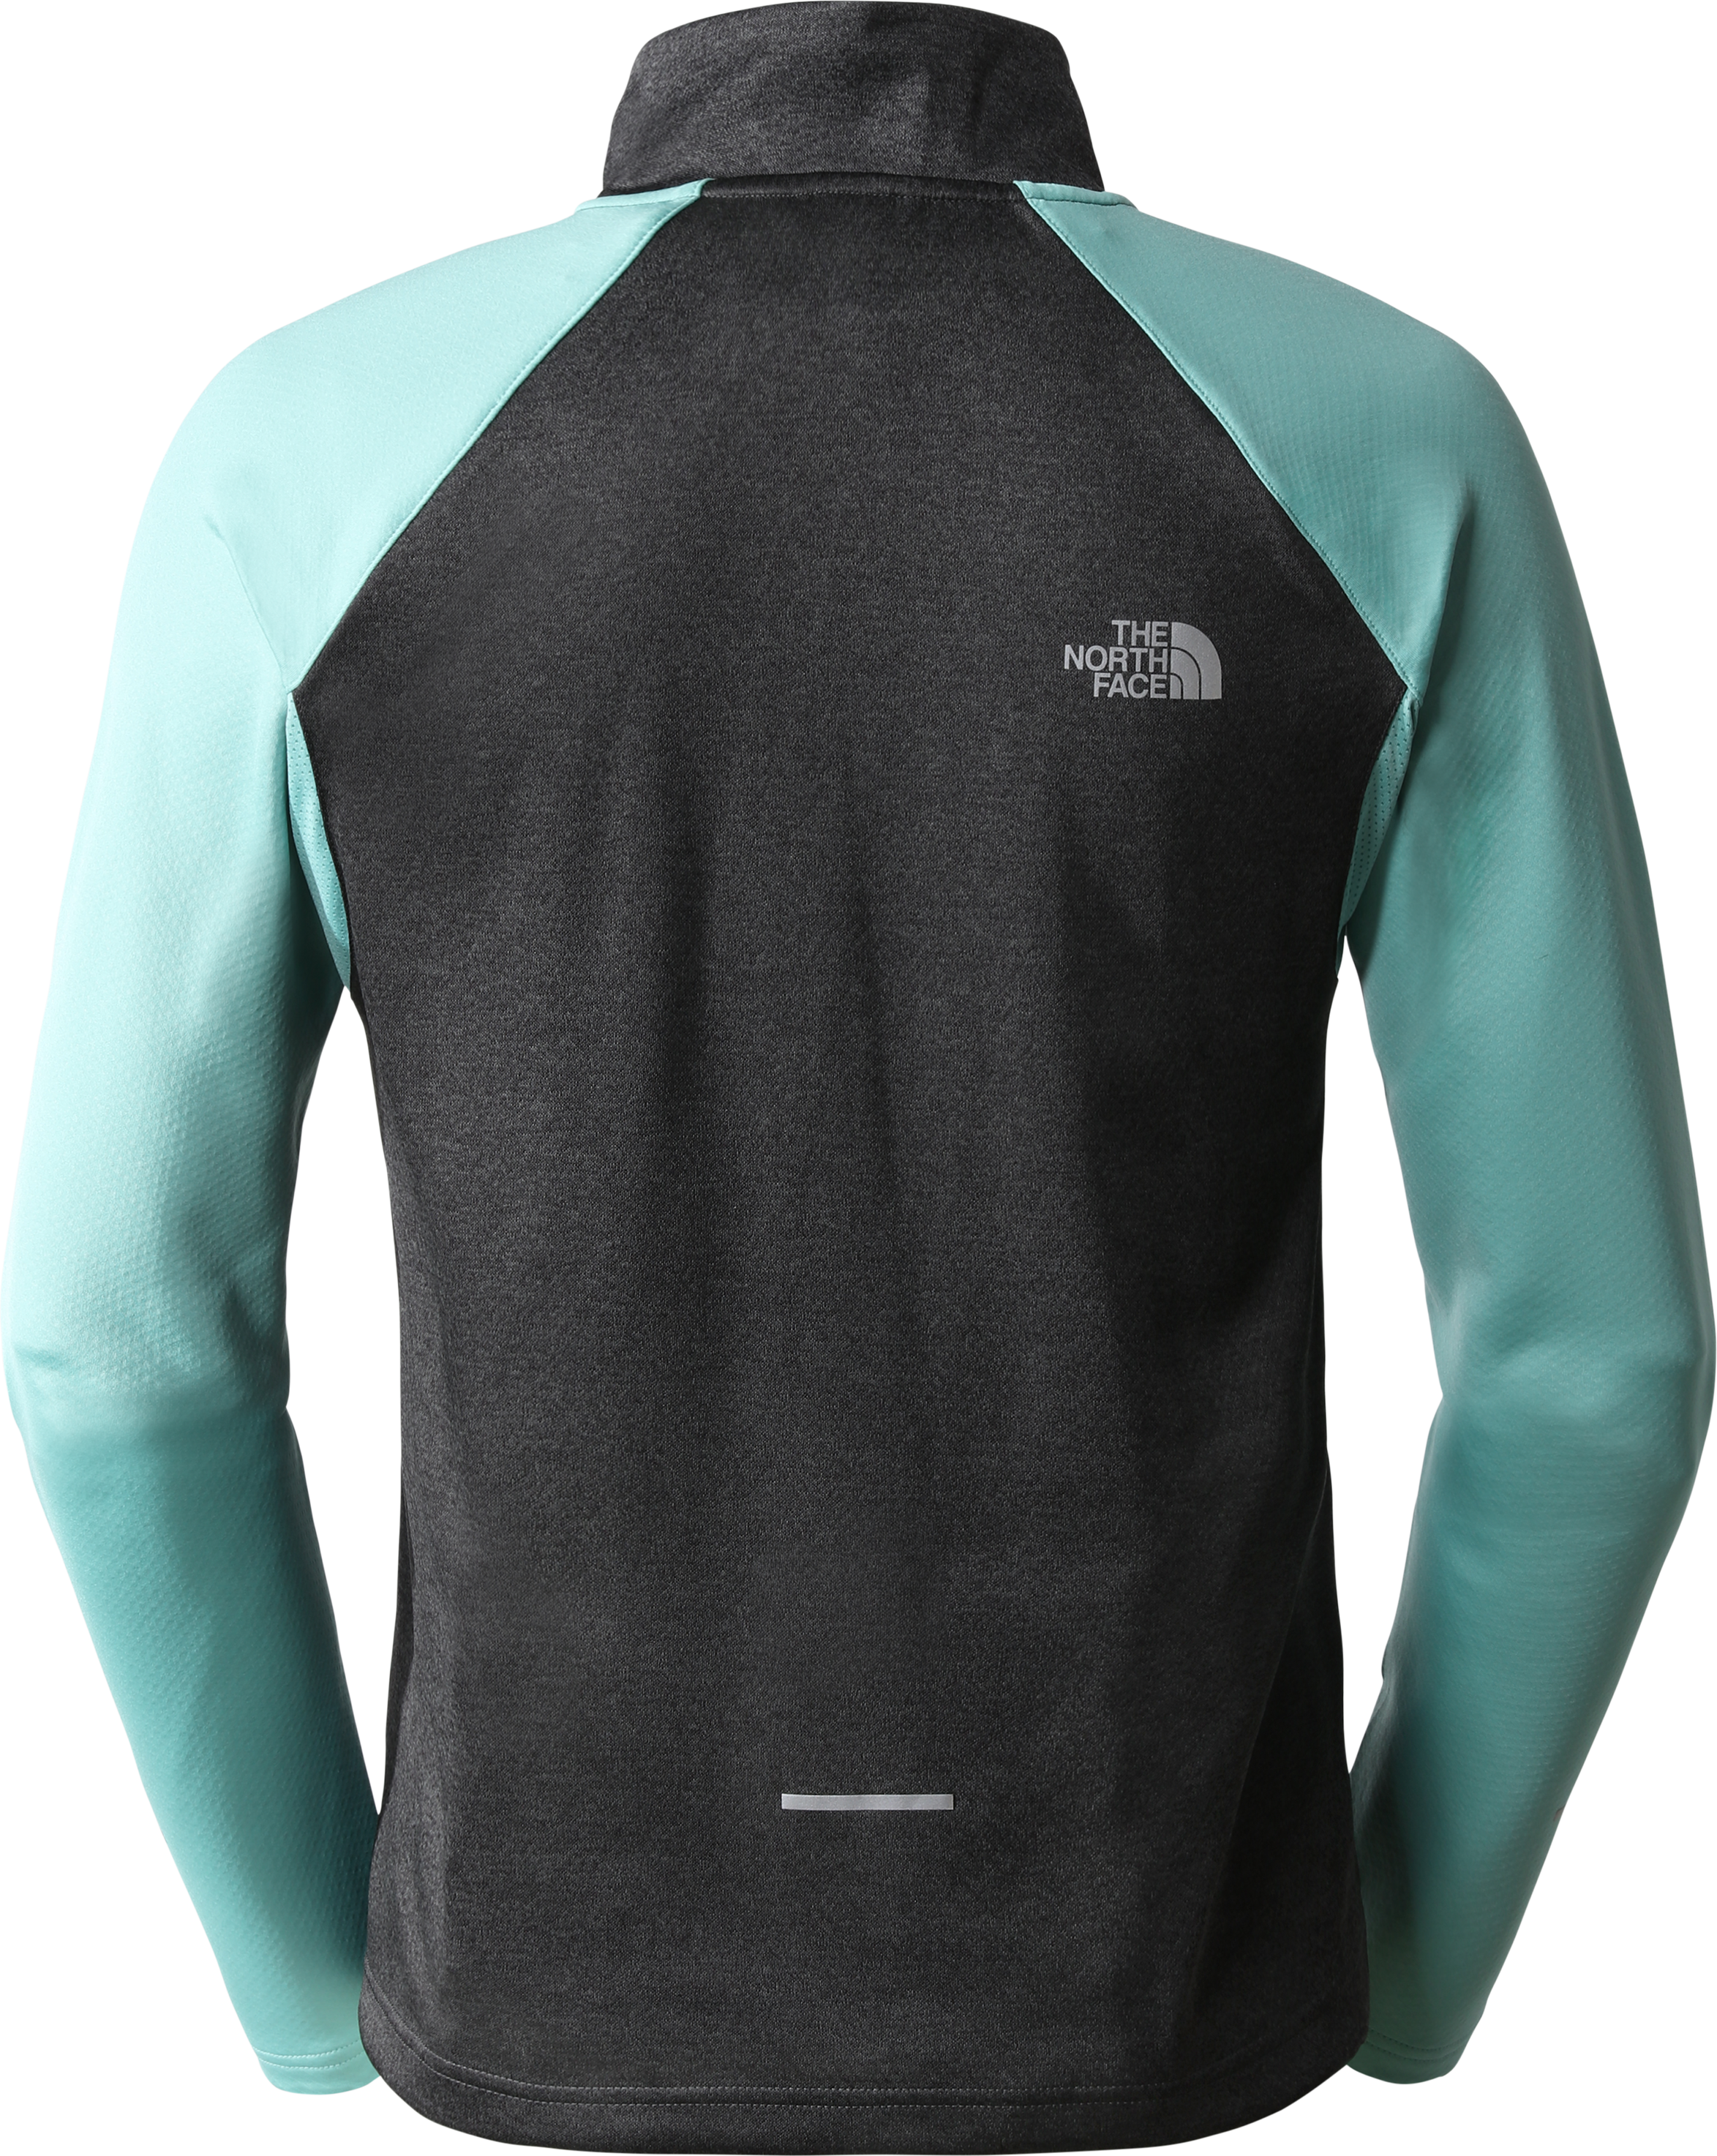 The North Face Running 1/4 Zip FlashDry long sleeve top in grey